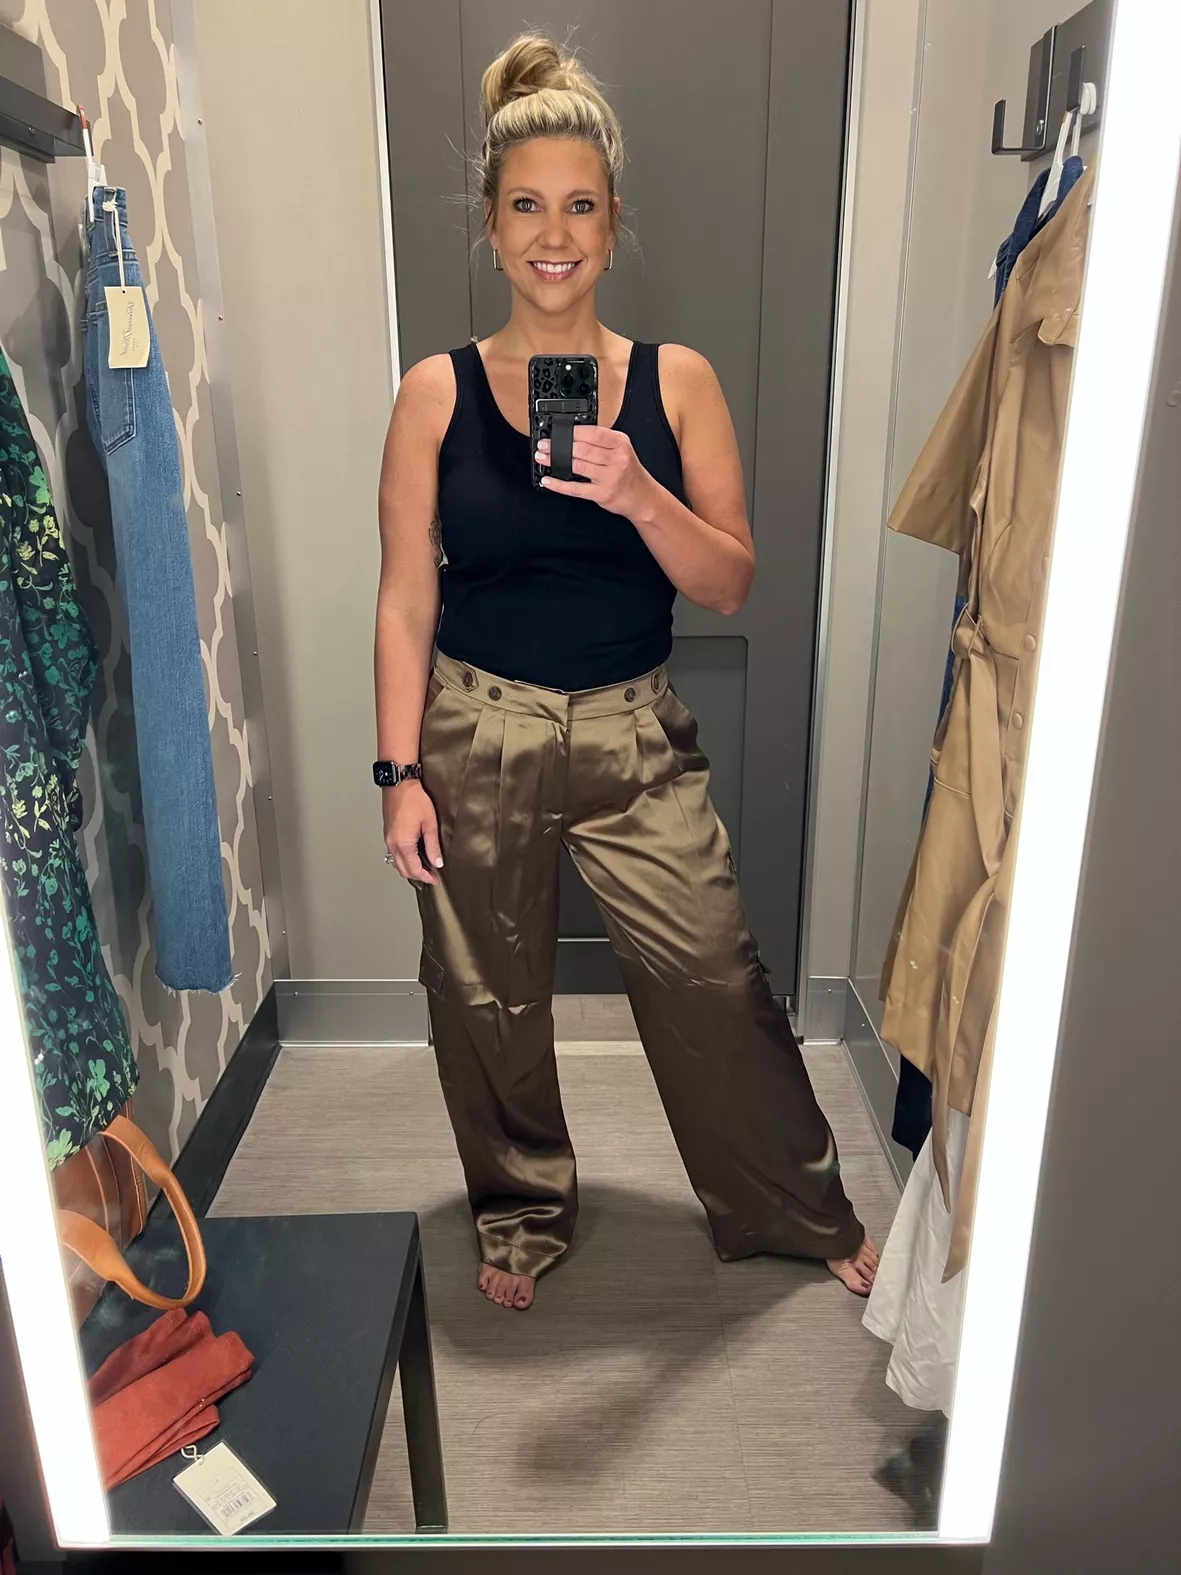 Women's High-Rise Satin Cargo Pants - A New Day